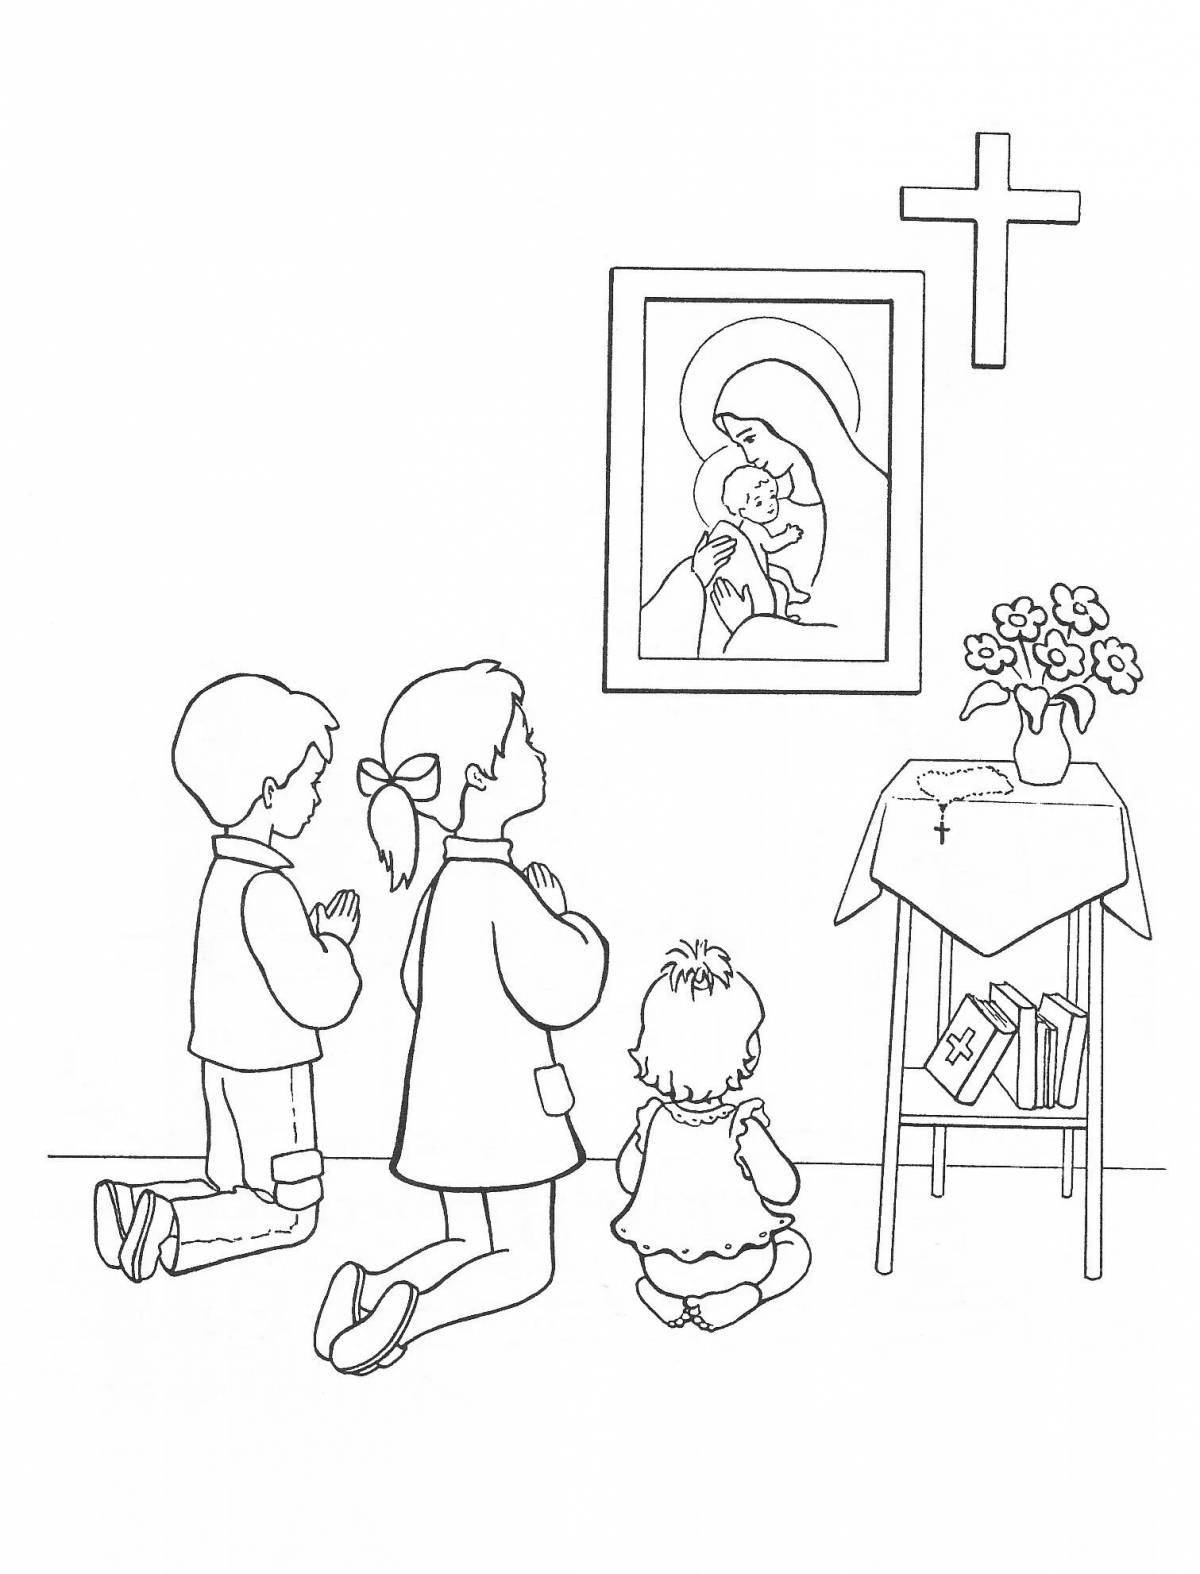 Deluxe orthodox coloring book